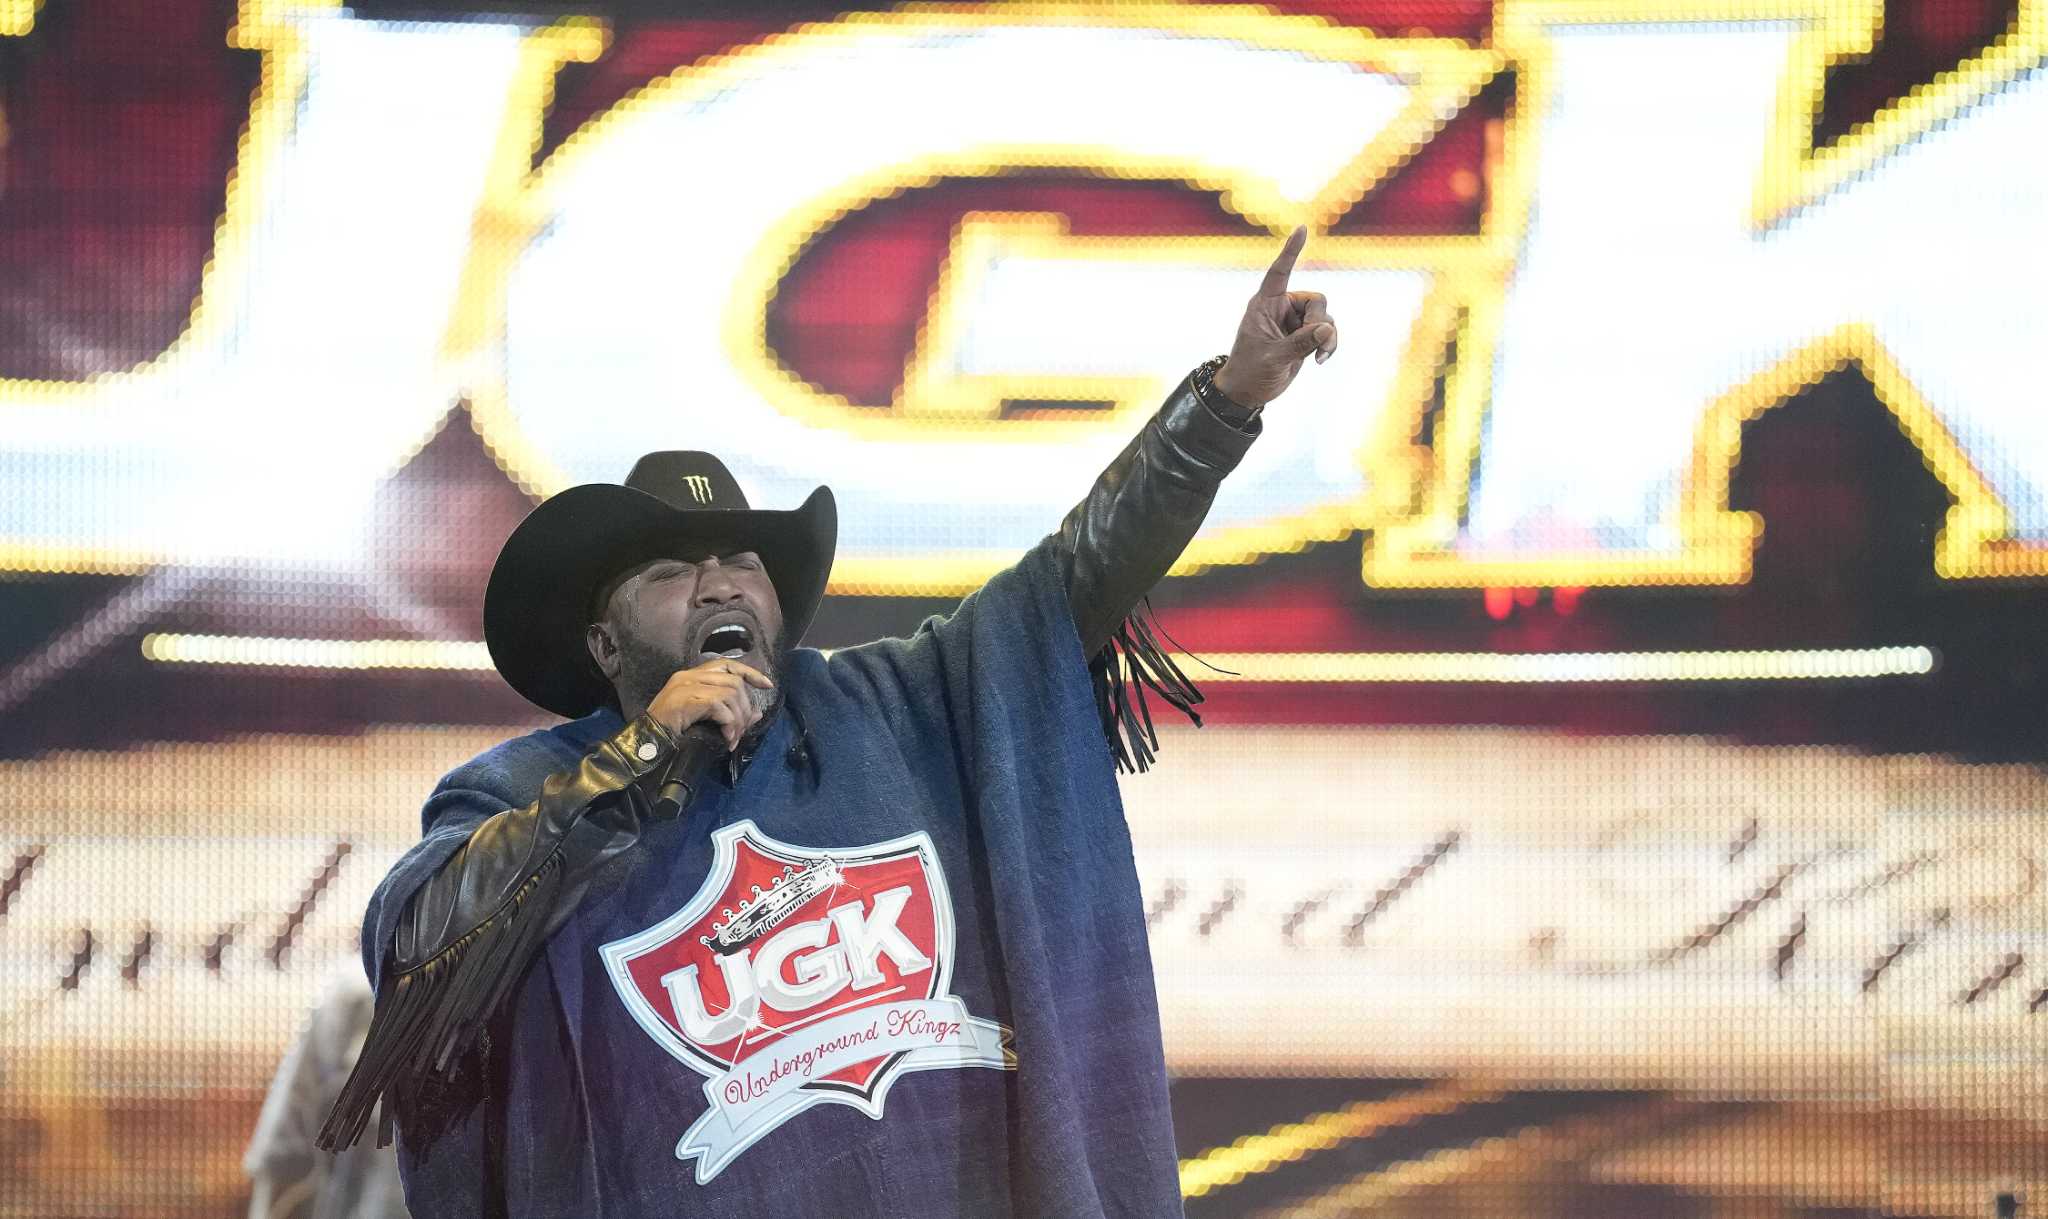 Bun B show creates 'largest swag surf' ever at Houston Rodeo